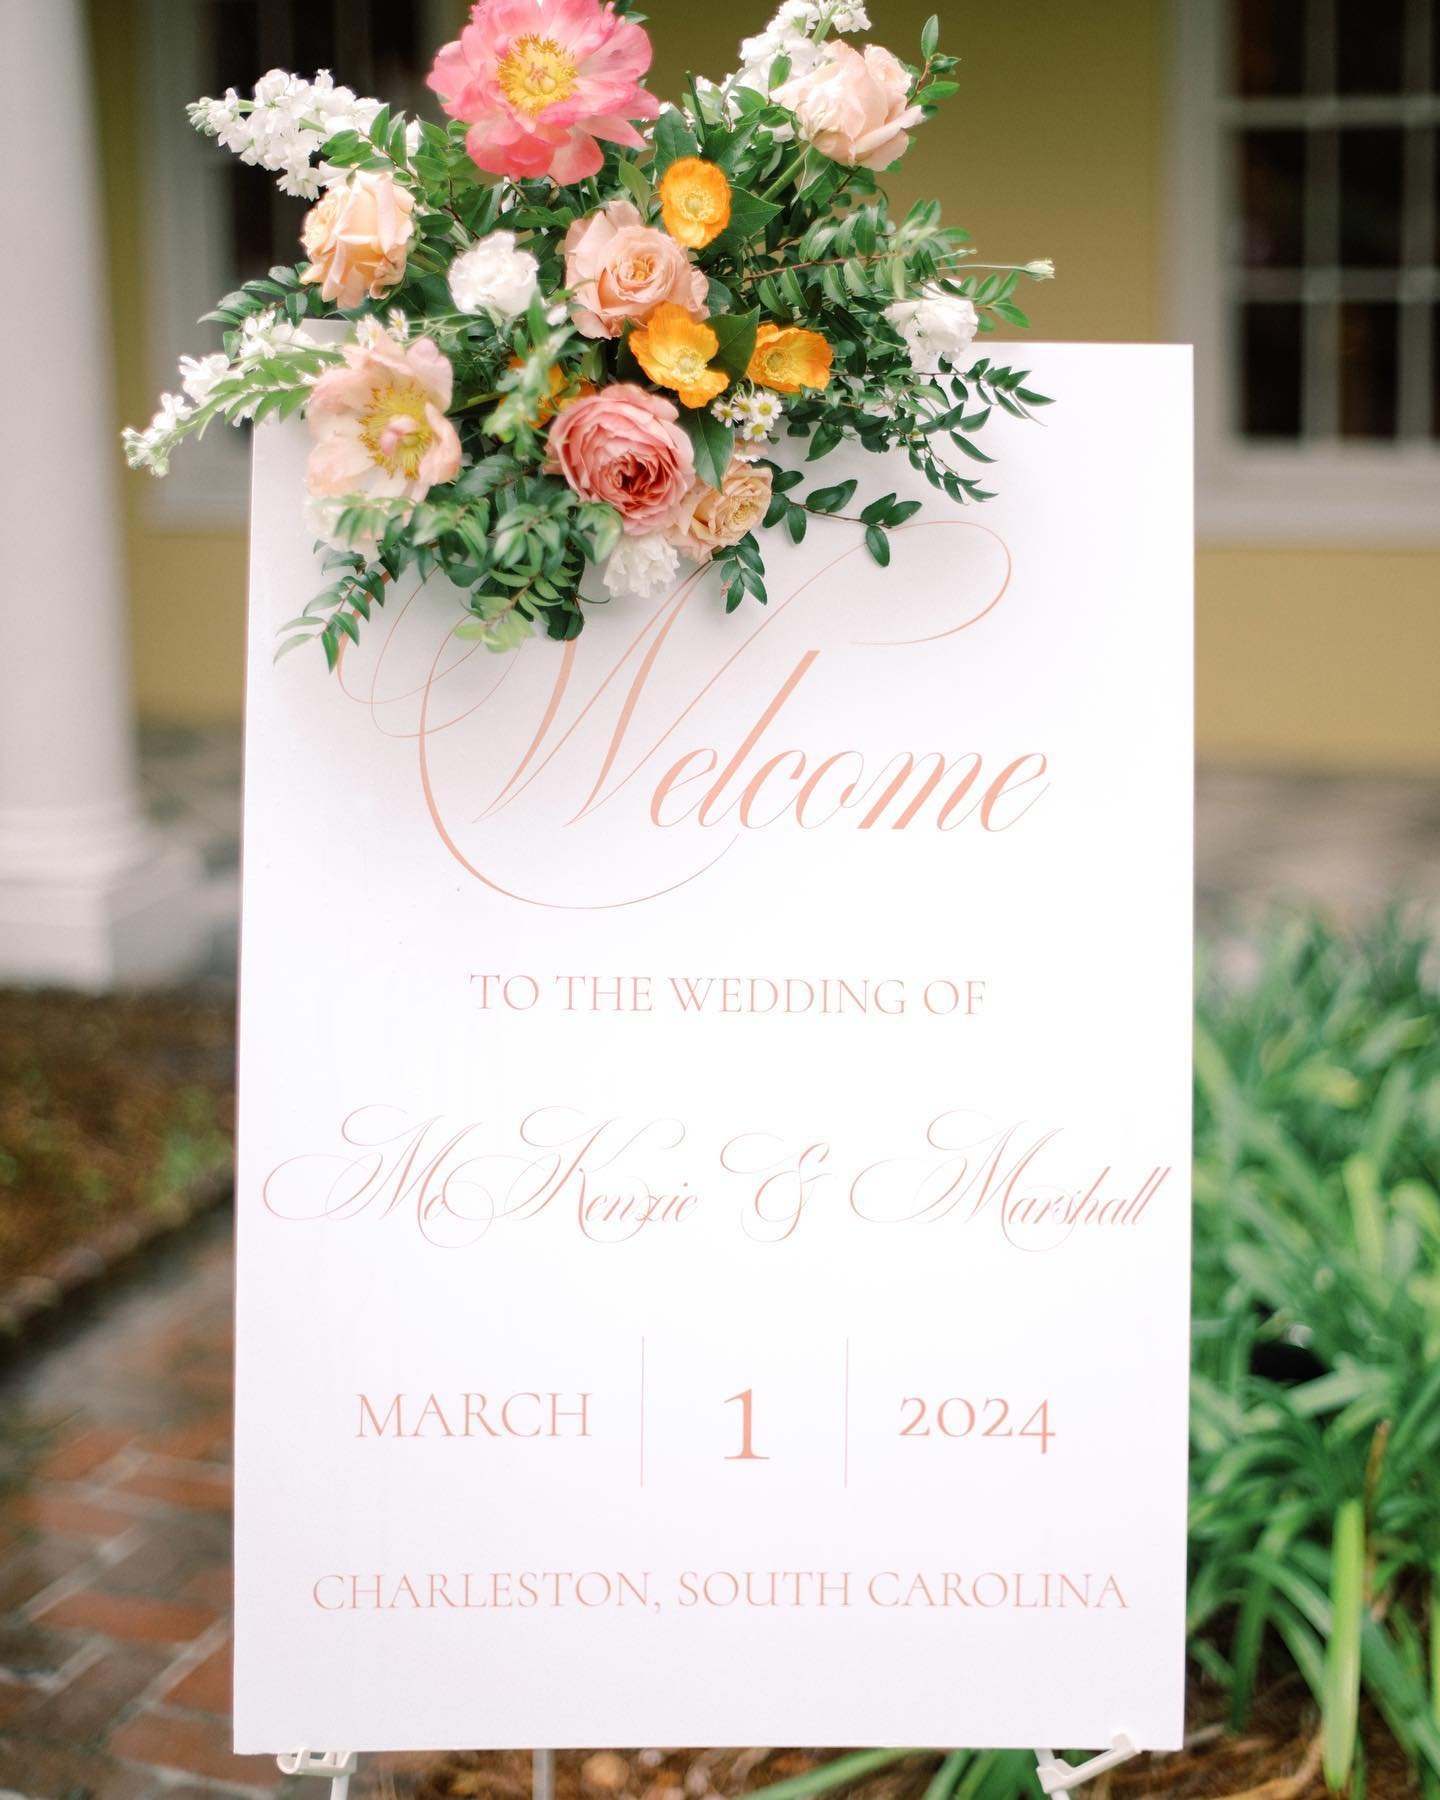 It is the season of day-of stationery!!! We have been BUSY preparing menus, programs, welcome signs, seating charts, and more for our spring brides 💐